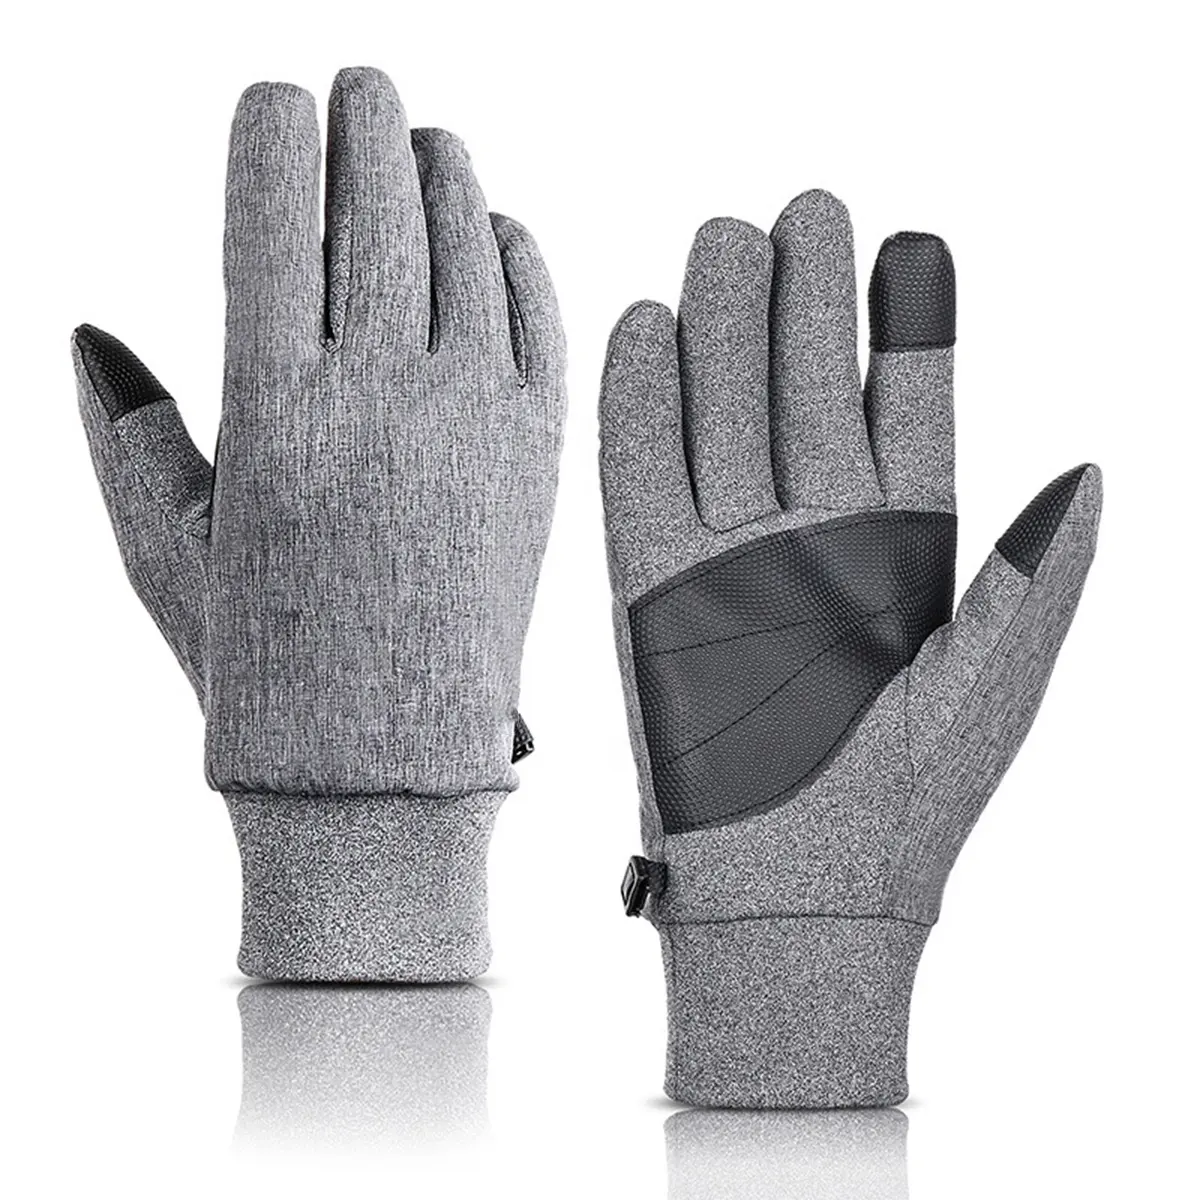 Thermal Insulated Hand Freezer Winter Work Waterproof Safety Working Gloves Warm Antislip For Men Women In Cold Weather